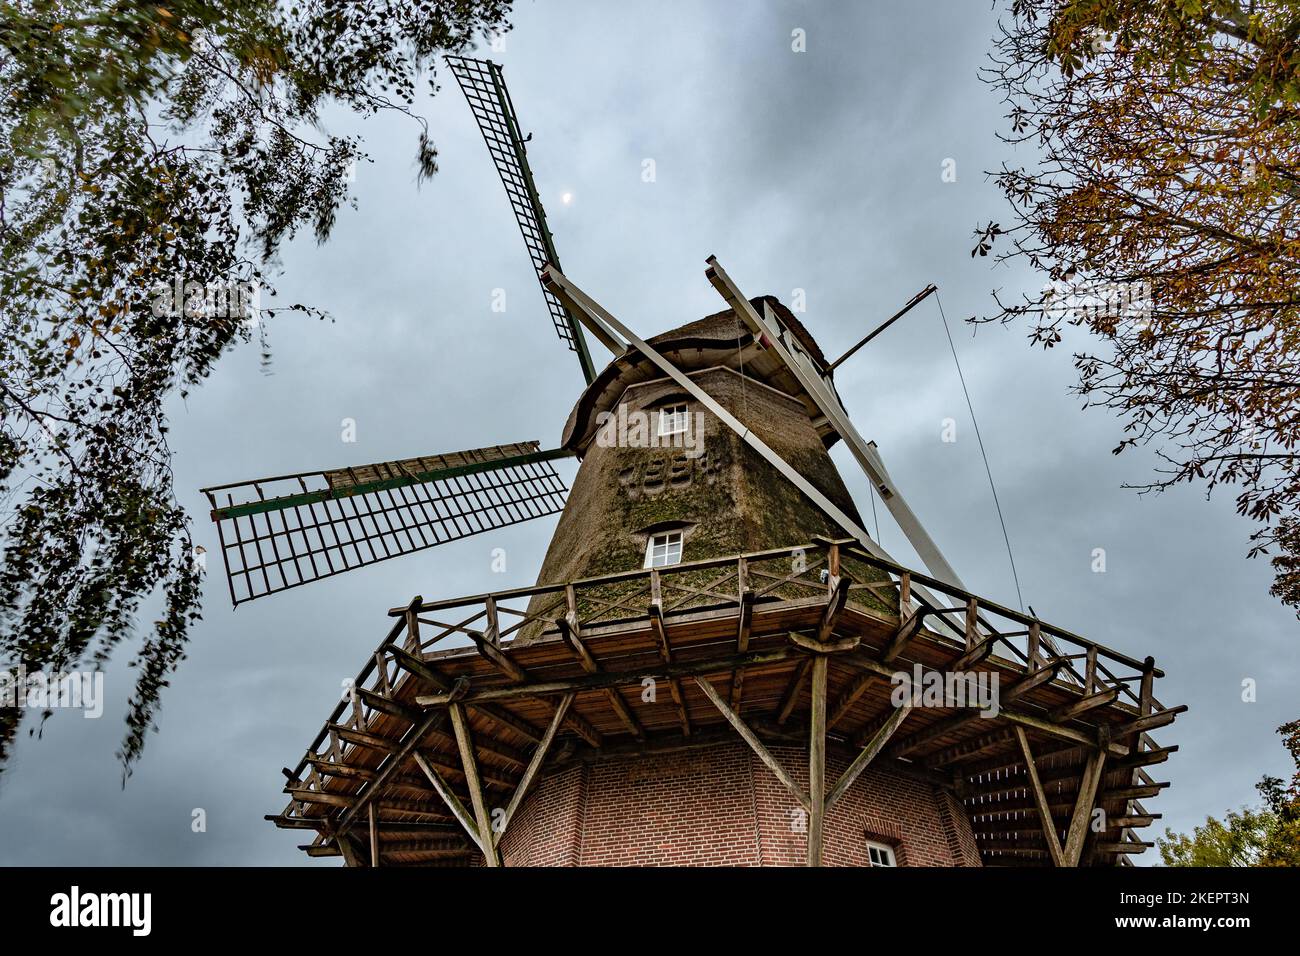 The upper part of a windmill taken from the frog's perspective from the side, showing part of the front and rear mill. The leaves of the adjacent tree Stock Photo